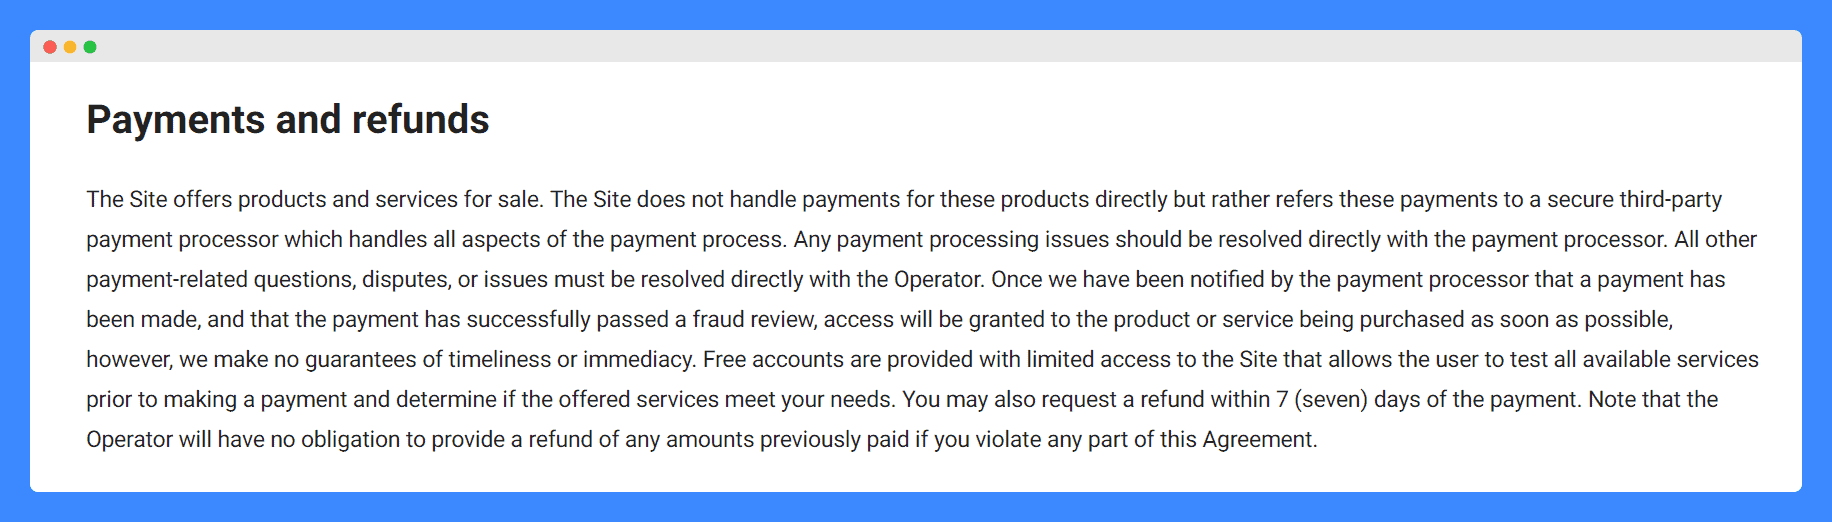 Sample "payments and refunds" clause in terms and conditions